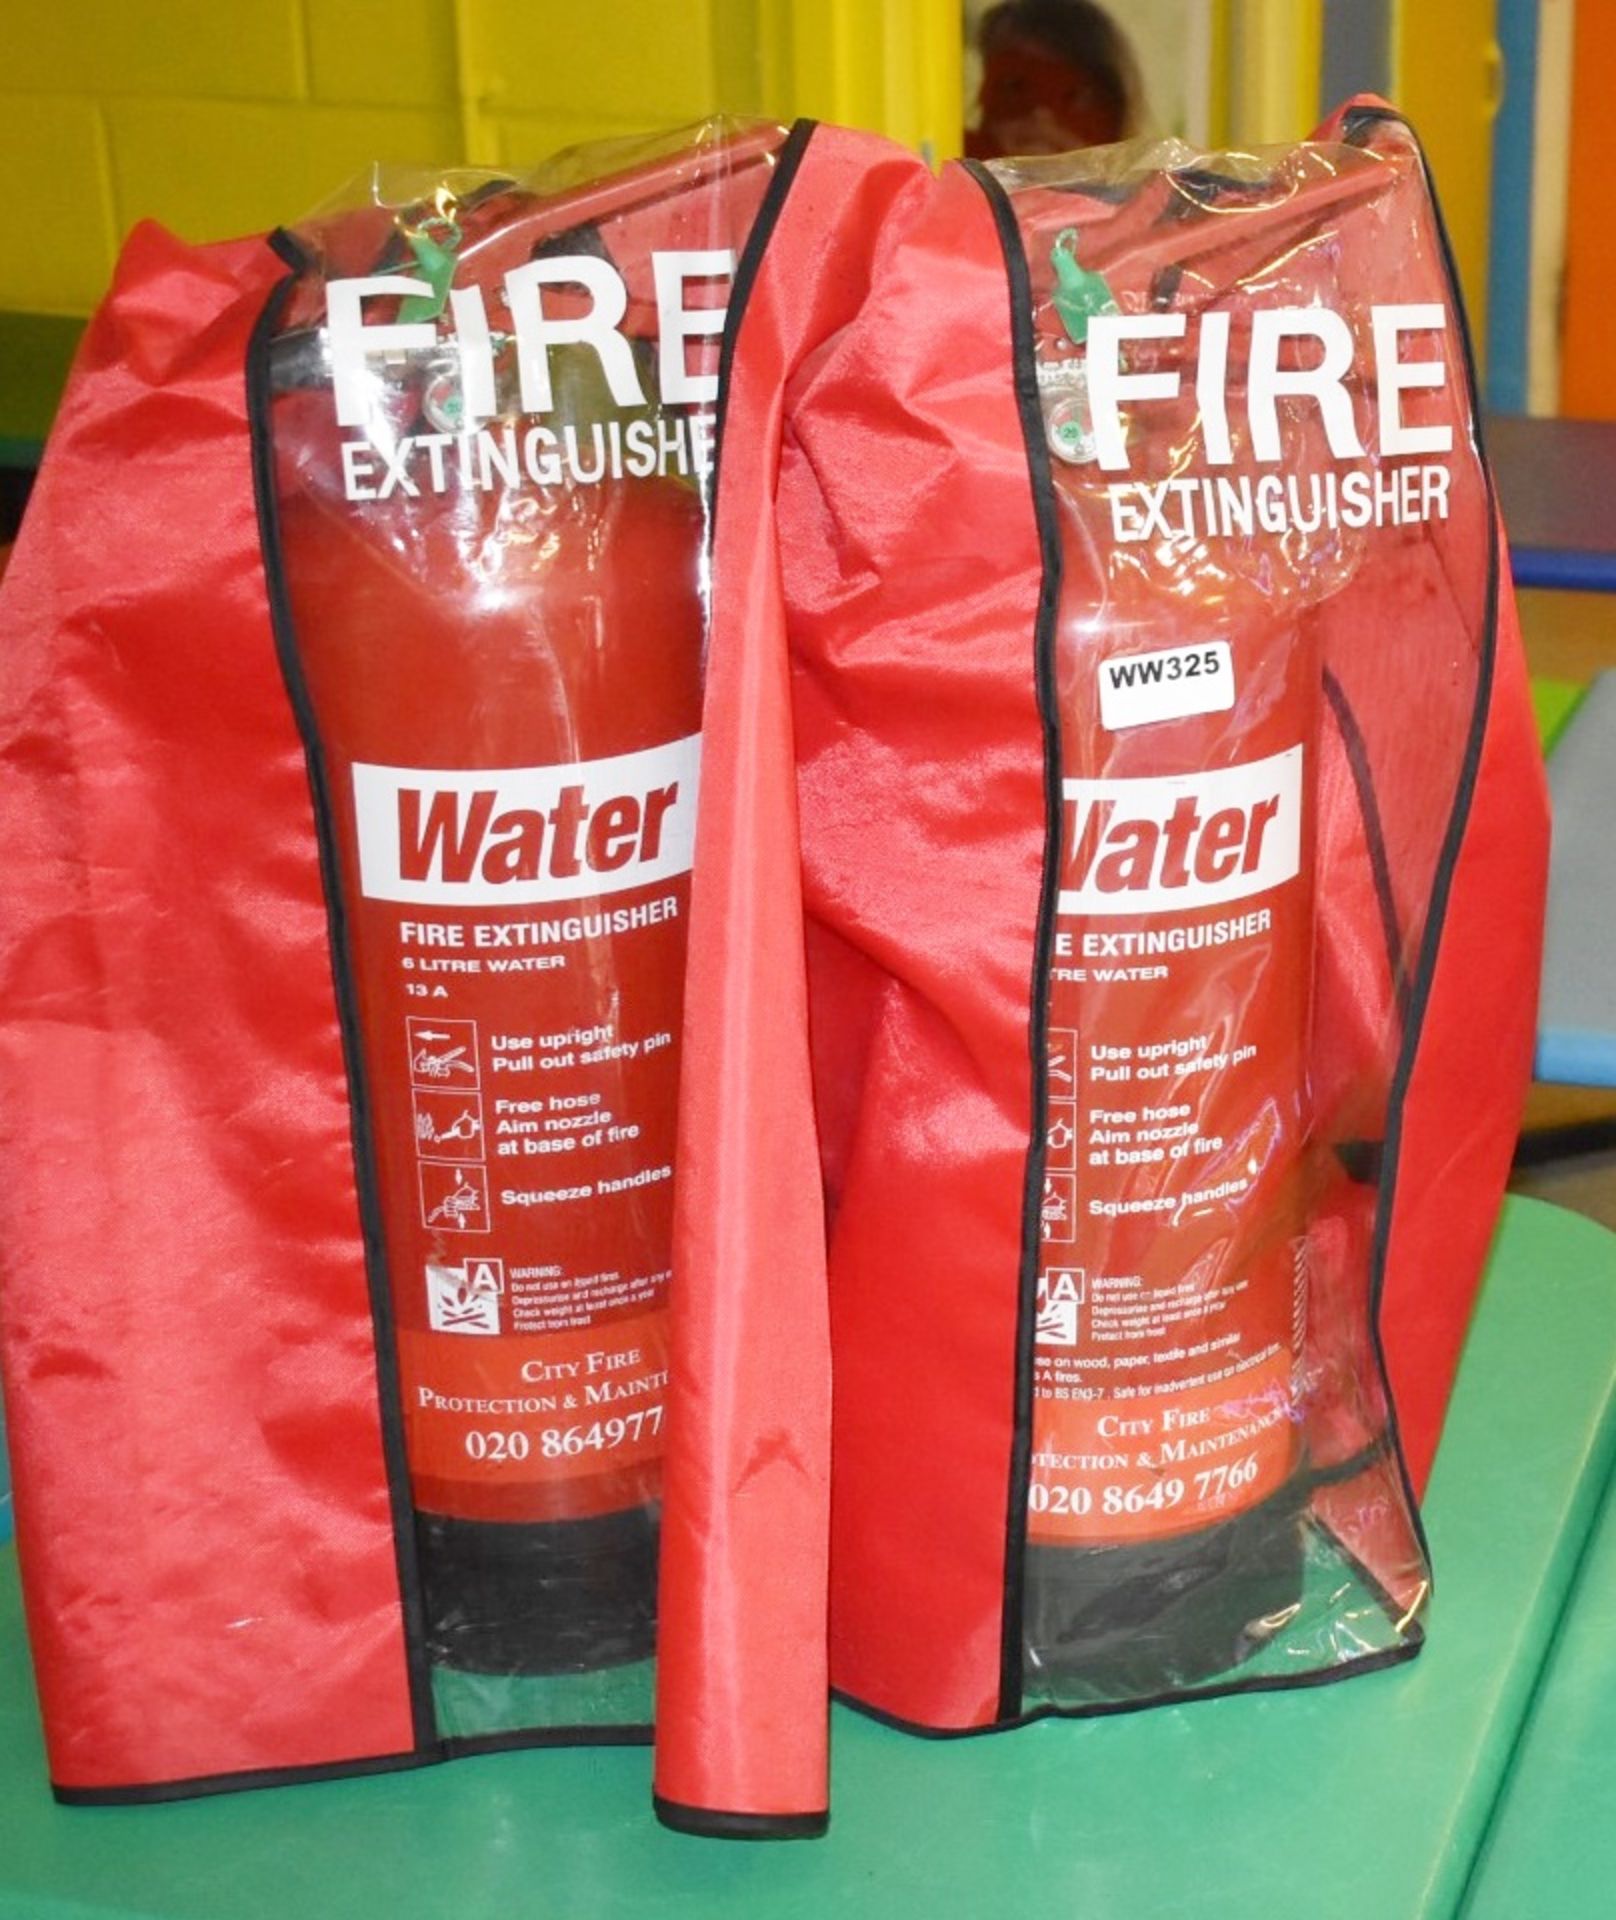 2 x 6 Litre Water Fire ExtinguishersWith Covers - CL520 - Location: London W10 More pictures,